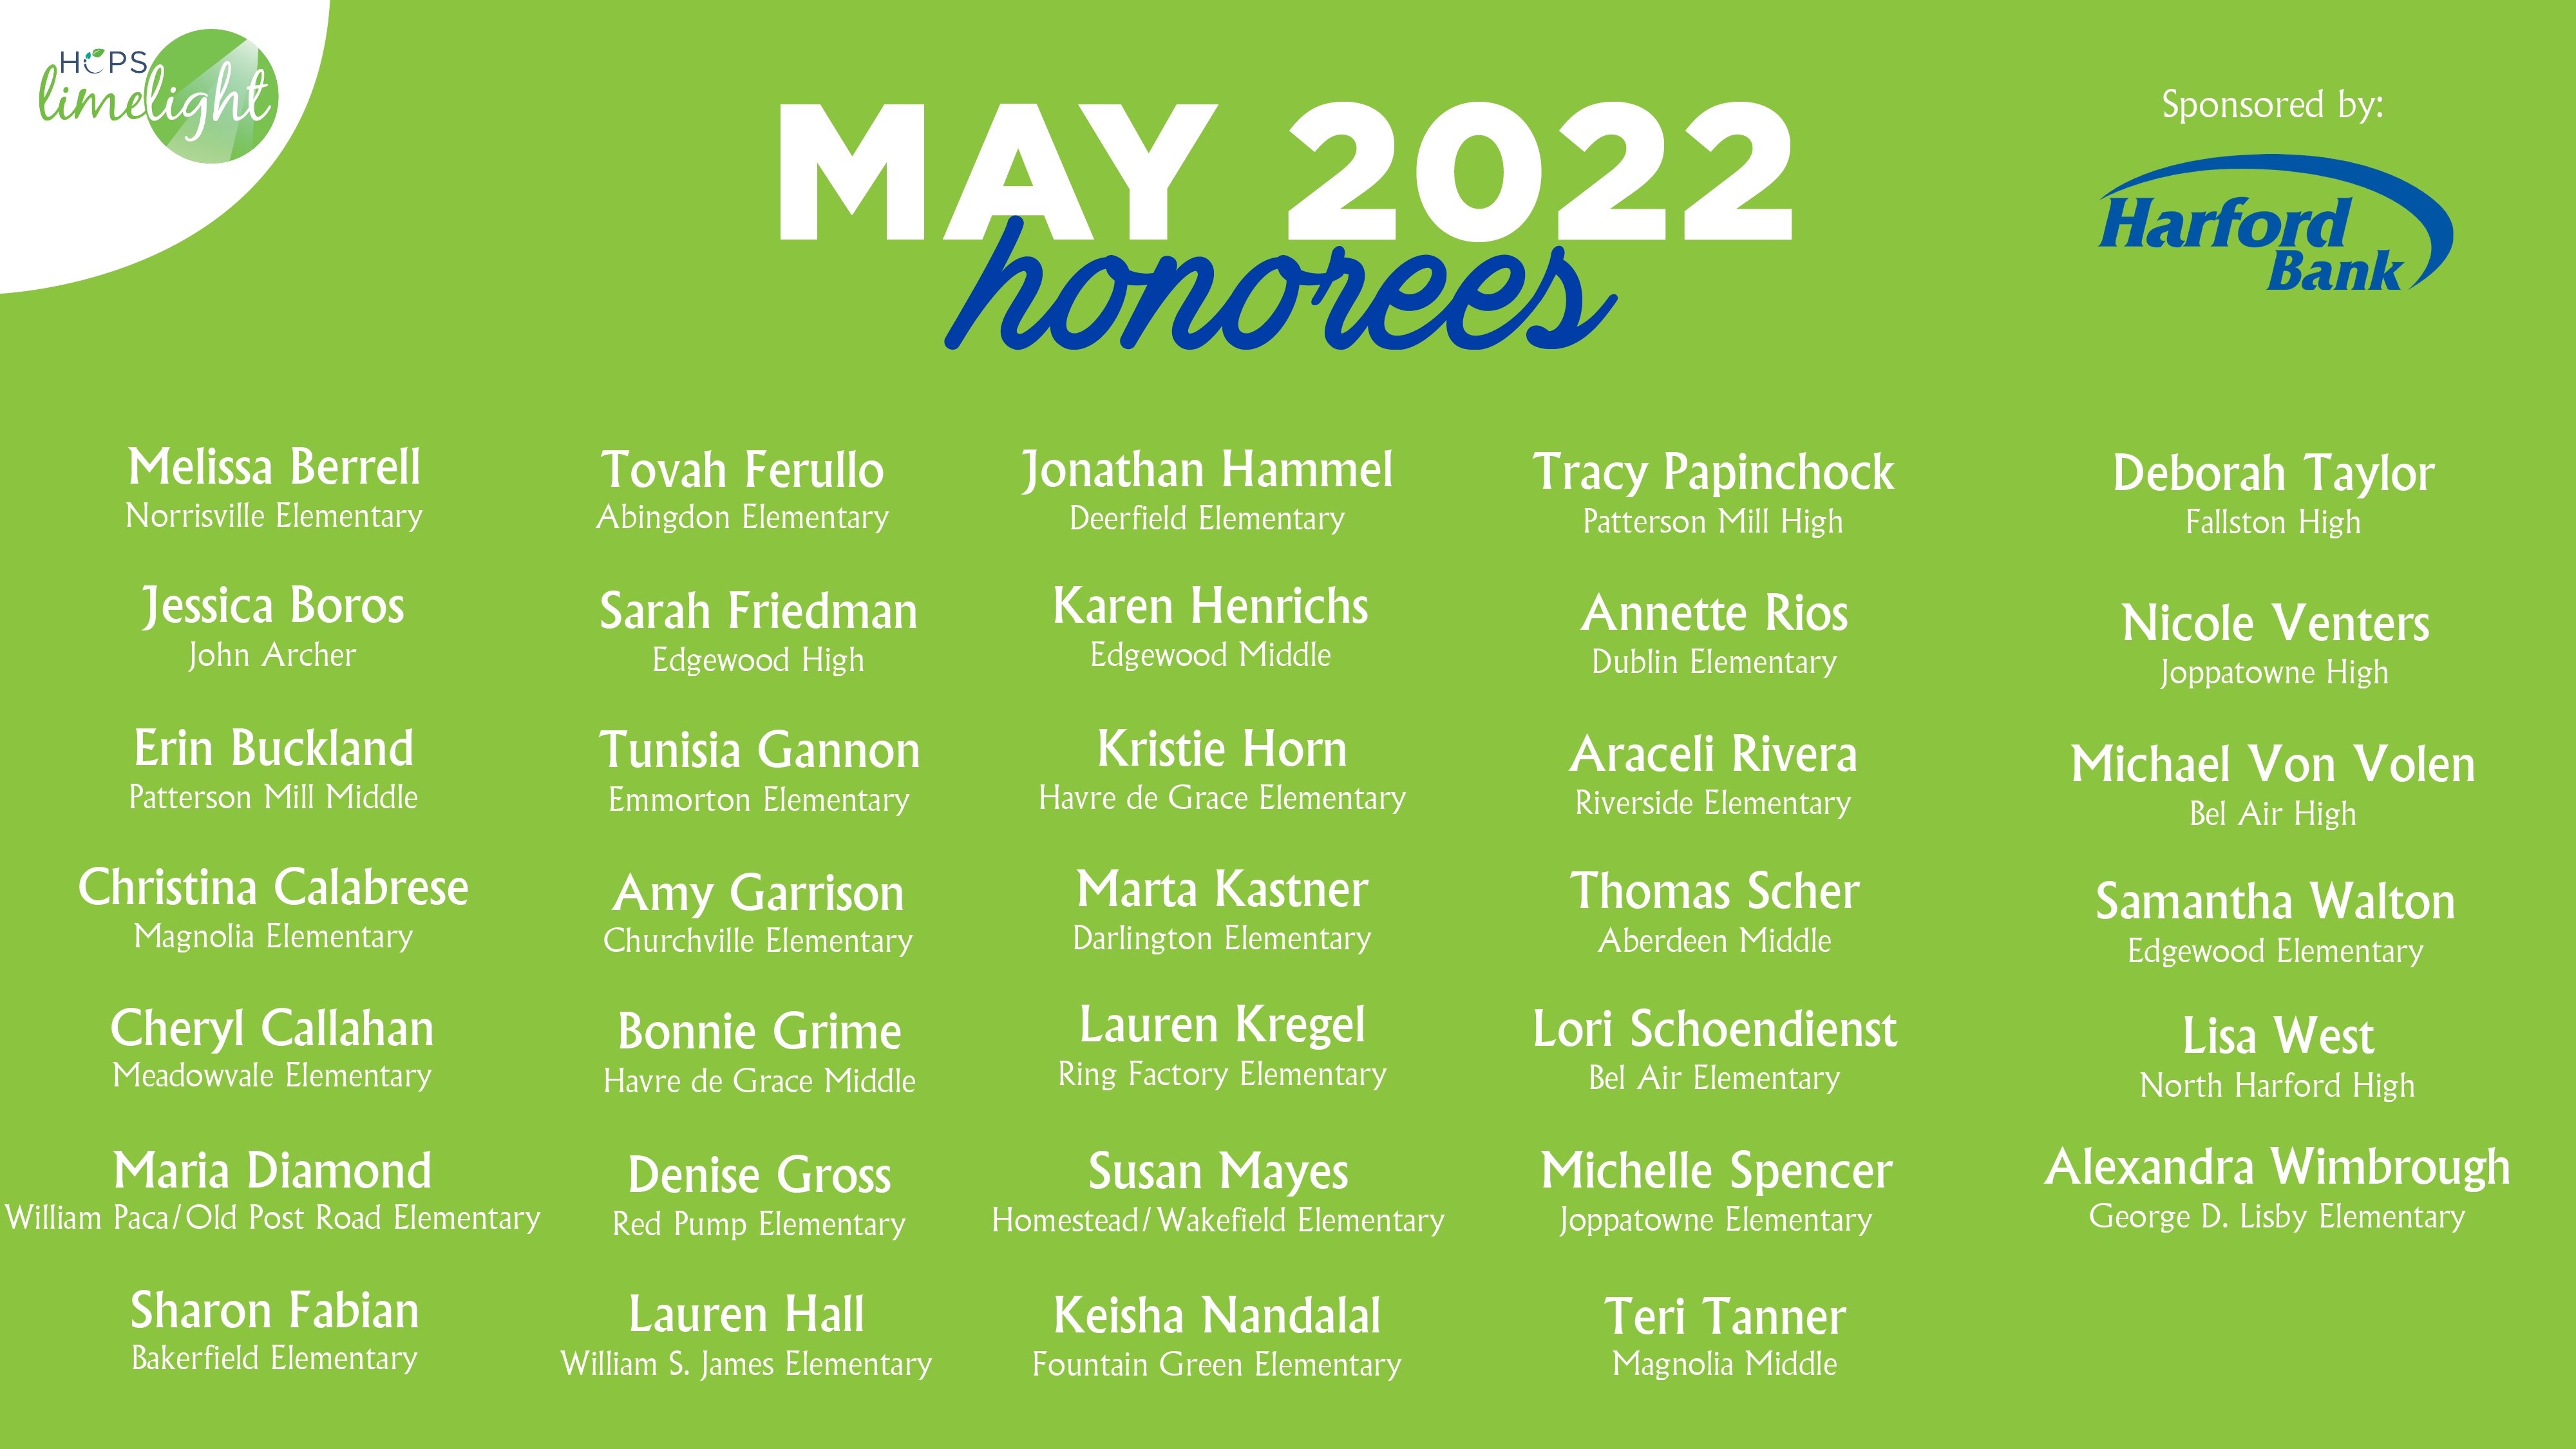 HCPS Limelight Honorees - May 2022